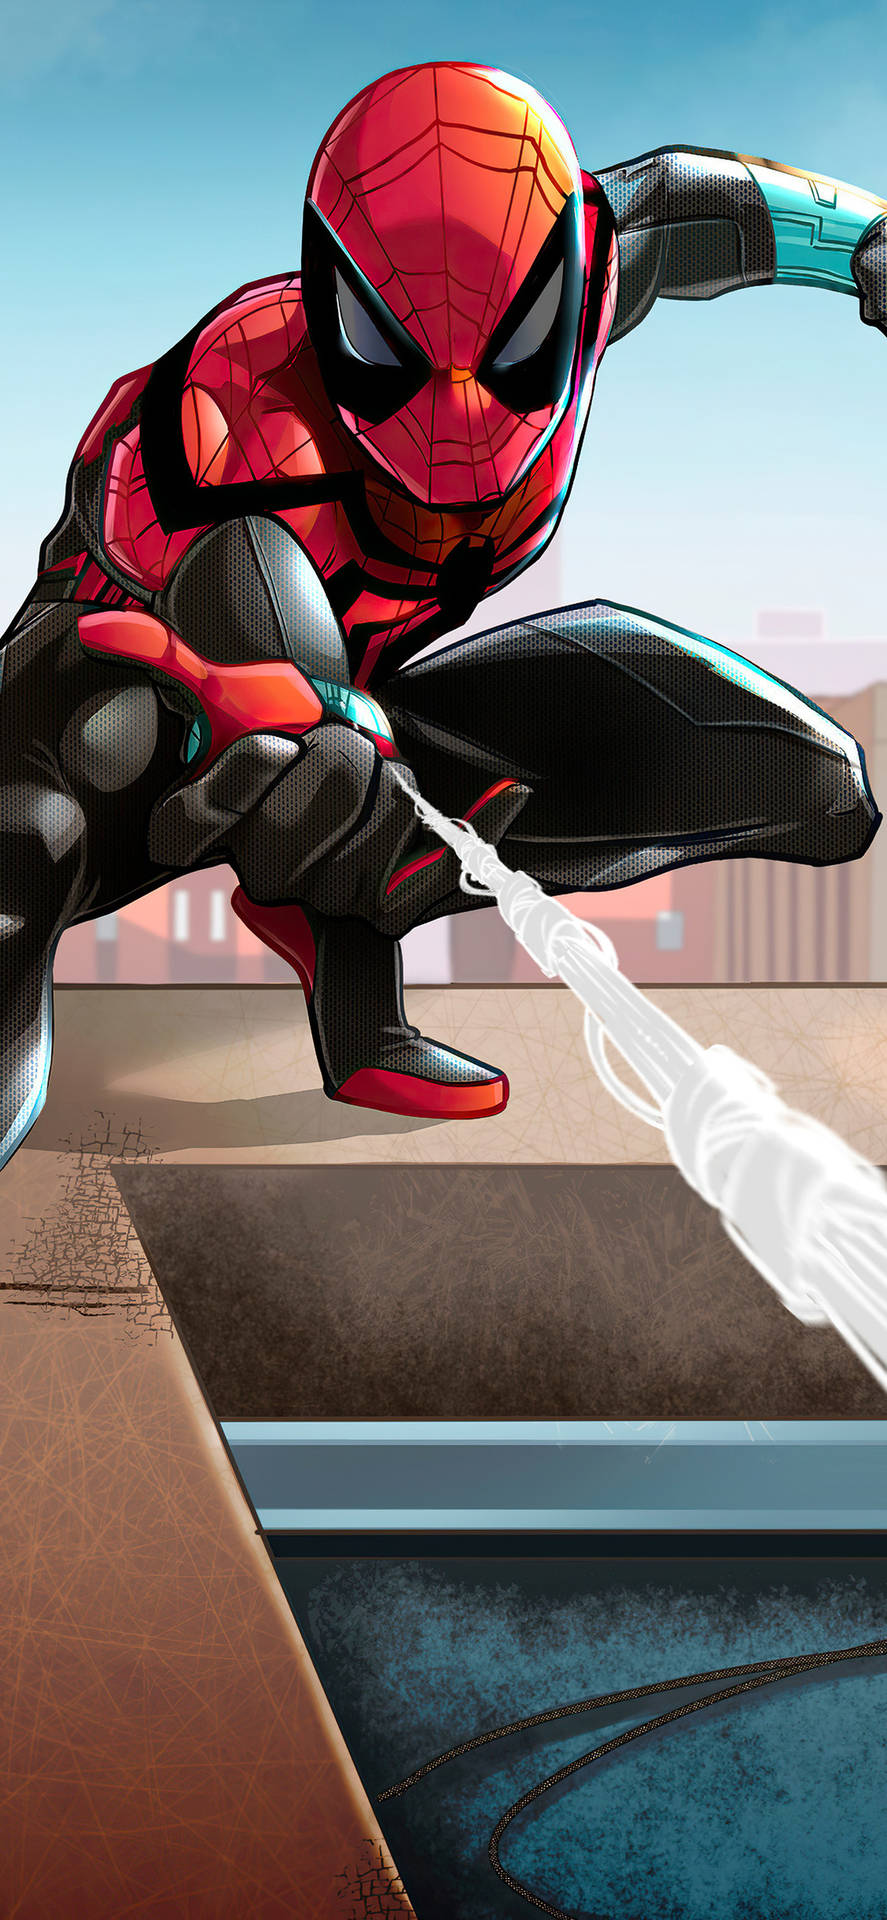 Download The Superior Spider-man Shooting A Web Wallpaper 